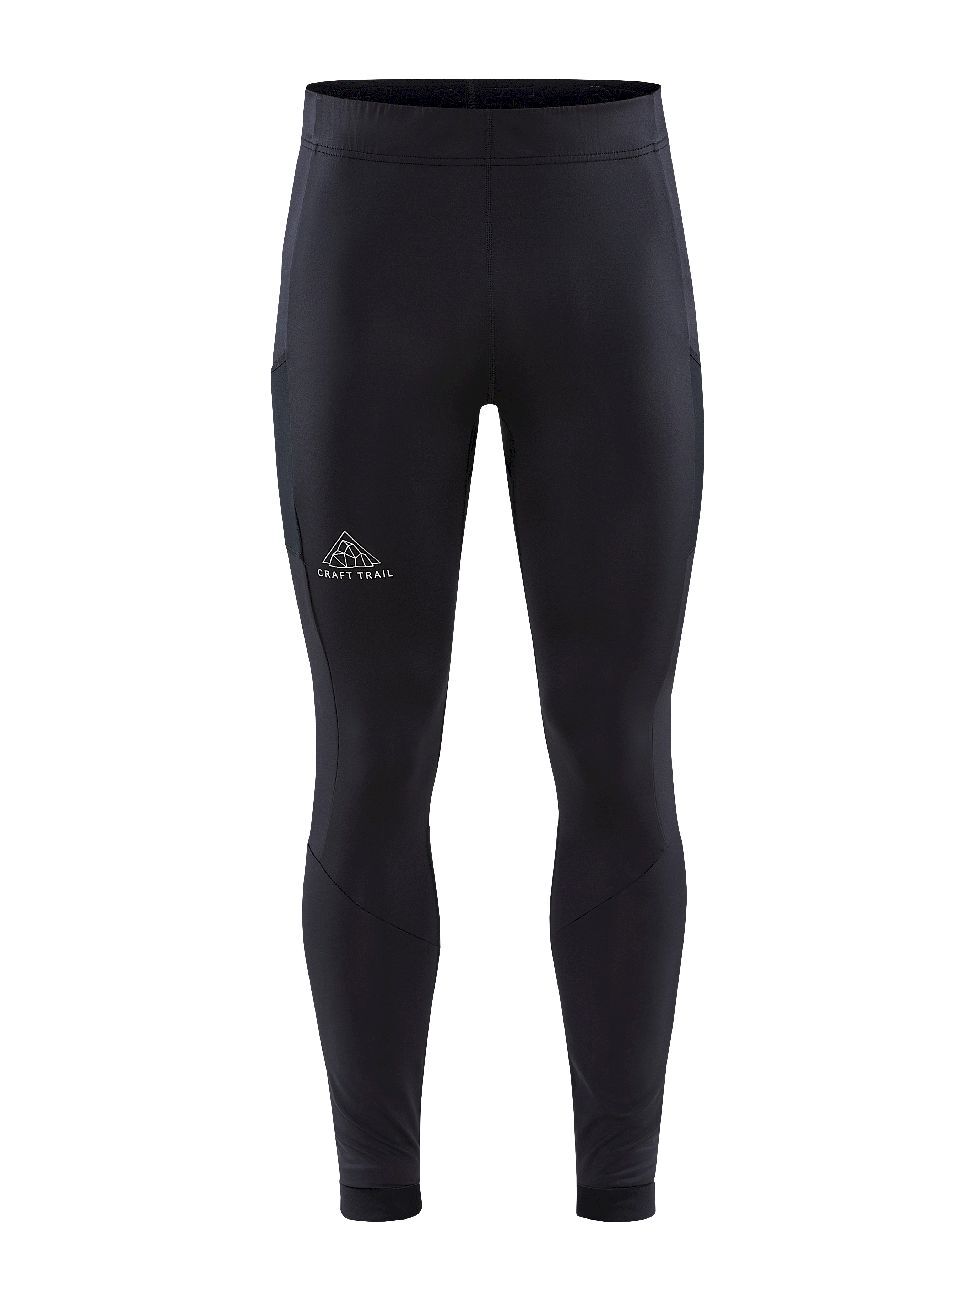 Craft Pro Trail Tights - Collant running homme